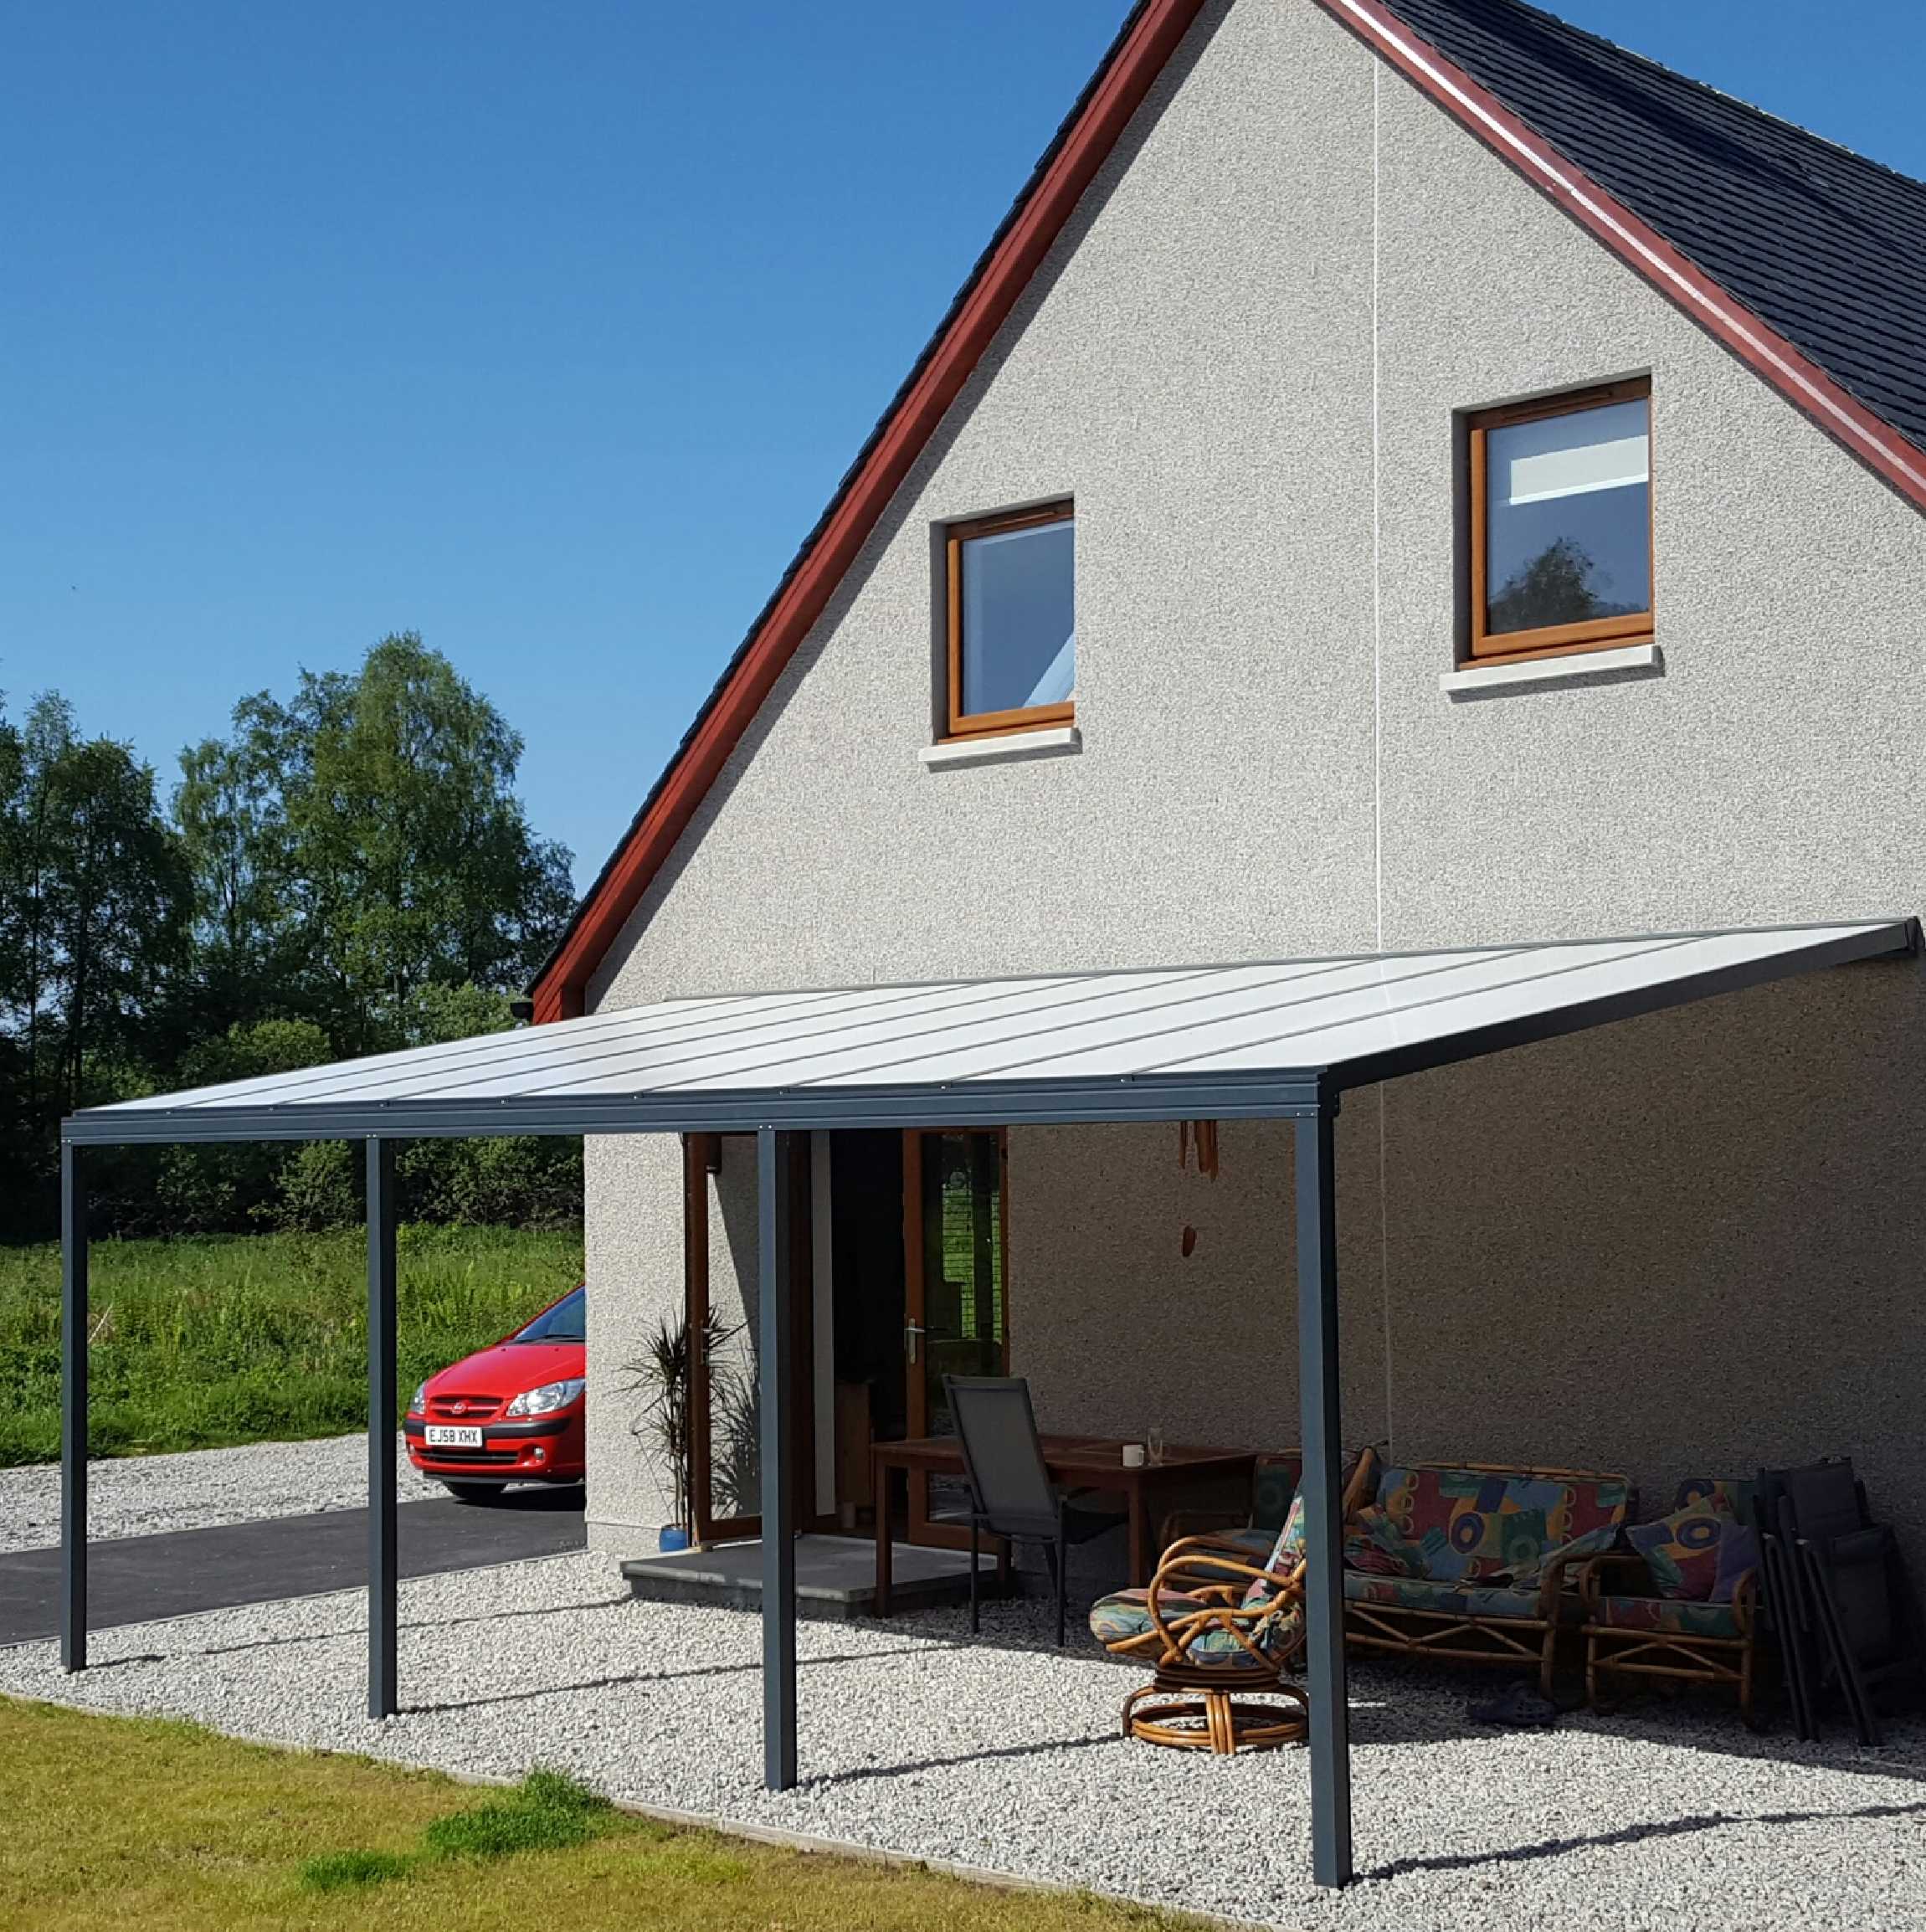 Great selection of SPECIAL OFFER Omega Smart Lean-To Canopy, Anthracite Grey, 16mm Polycarbonate Glazing - 6.0m (W) x 2.0m (P), (3) Supporting Posts